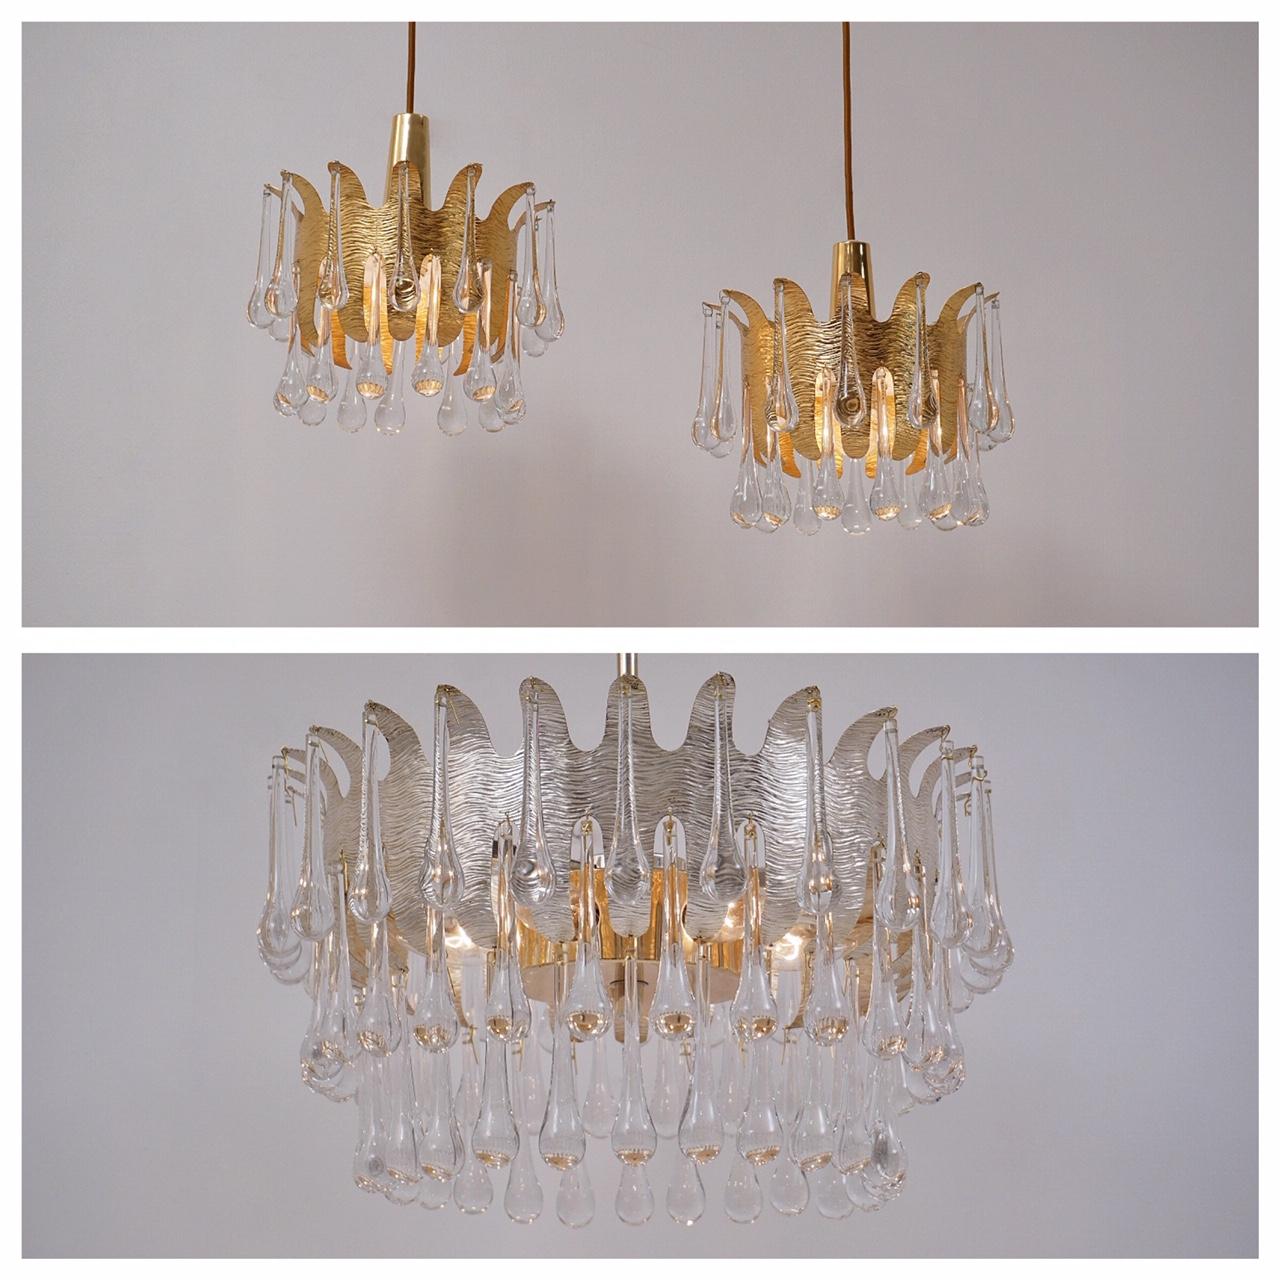 Palwa Chandelier Gold Plated Gilt Brass and Crystal by Ernst Palme, 1960s German For Sale 7